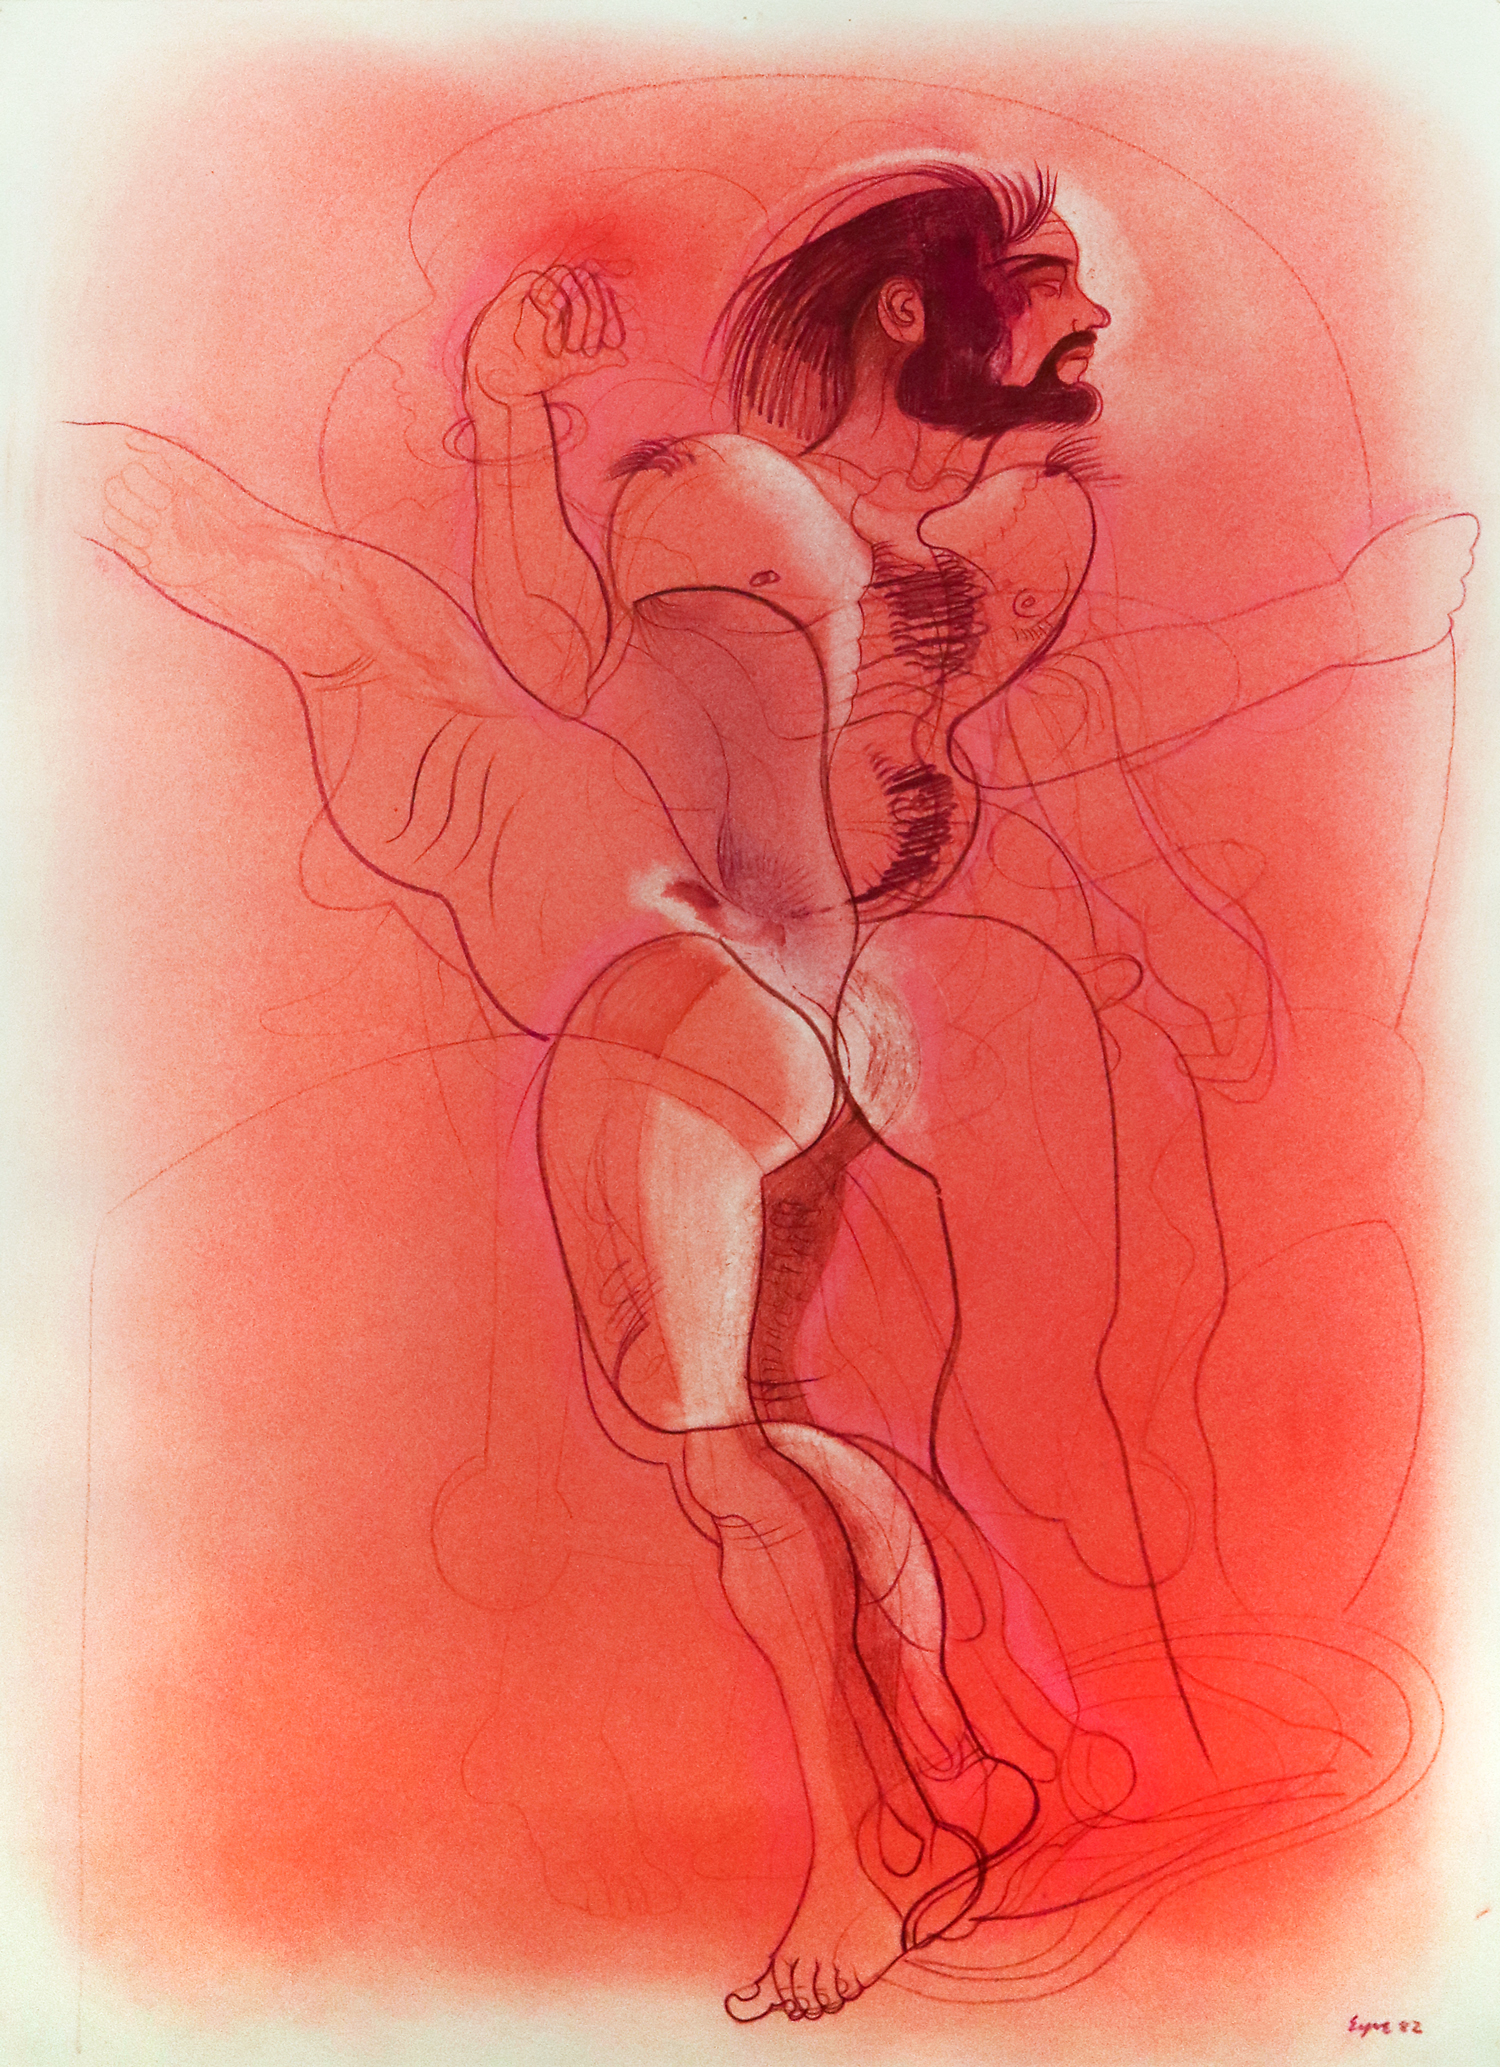 Drawing by Canadian artist Ivan Eyre depicting an abstracted, nude male figure in red. There are many lines drawn around the body suggesting movement.